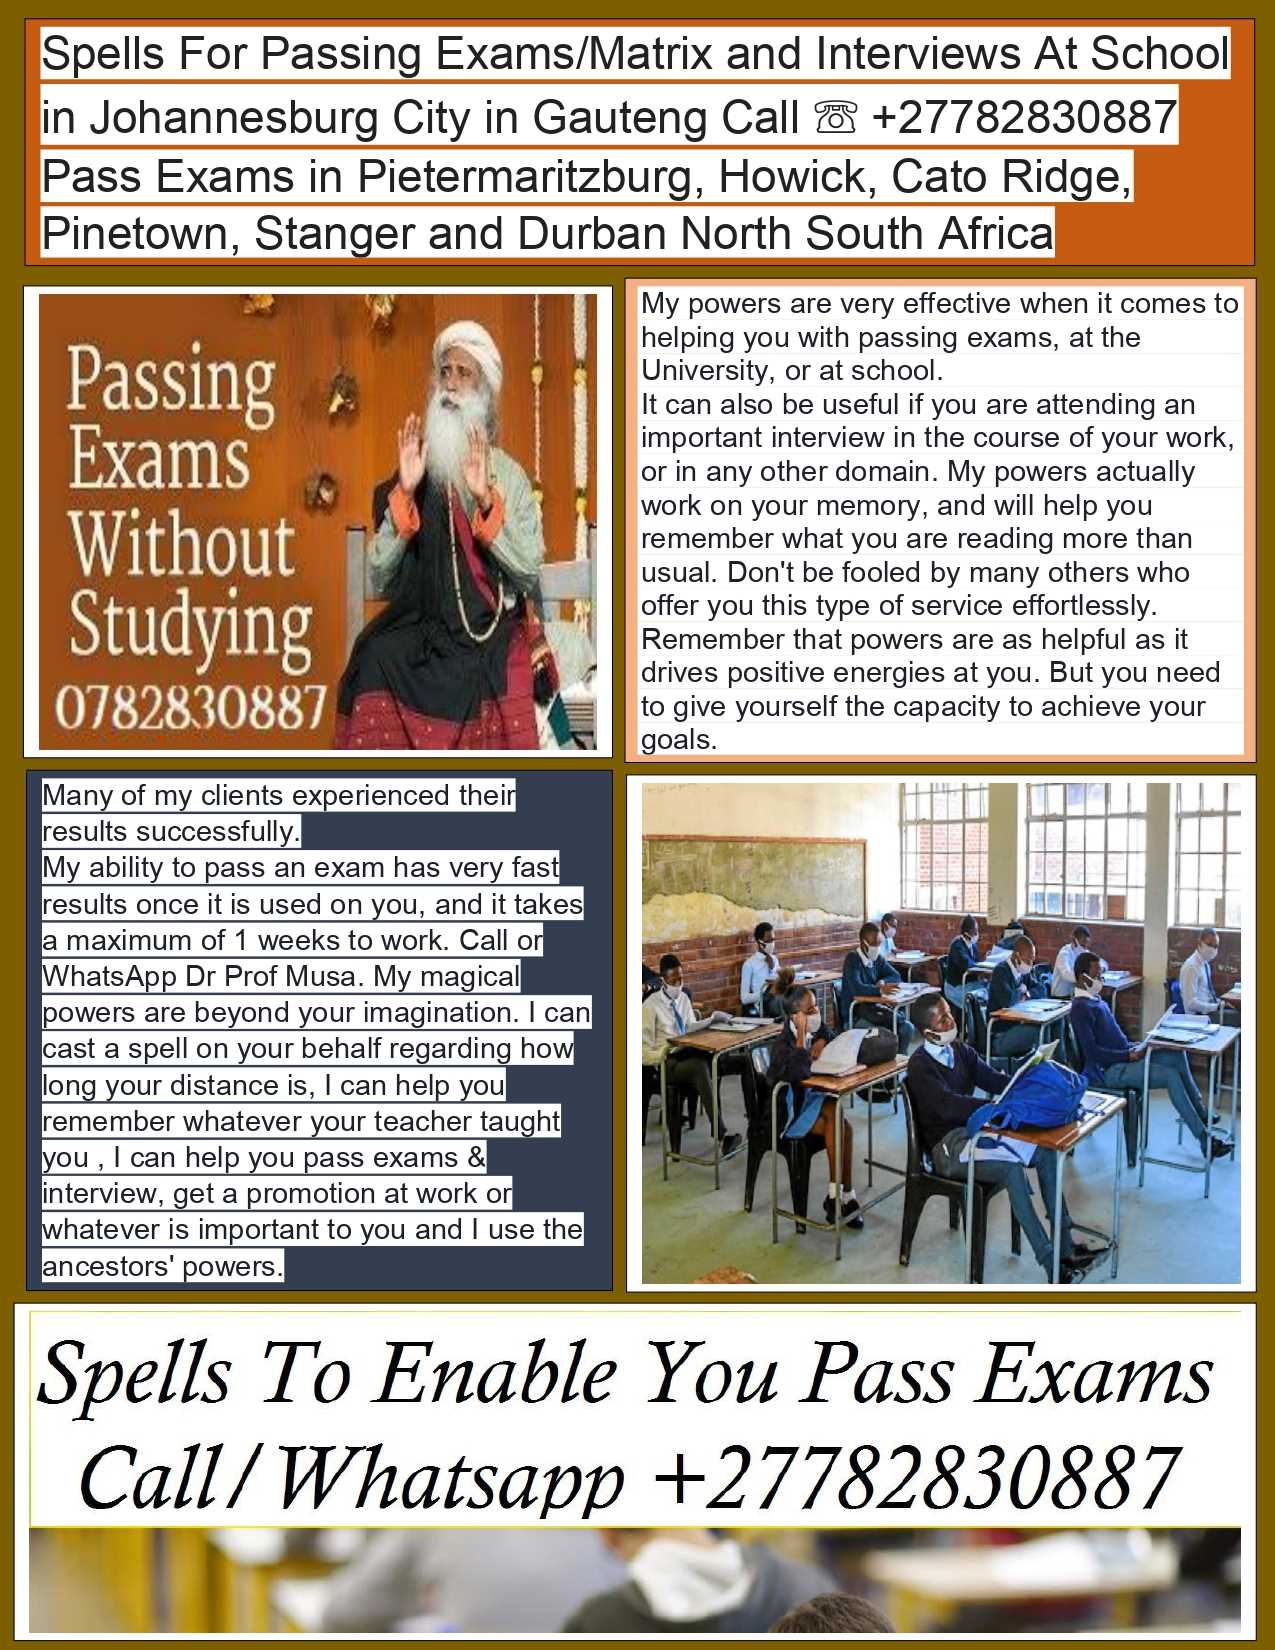 Pass Exams/Matrix At School In Praxedis G. Guerrero Municipality in Mexico, Johannesburg And Pietermaritzburg City Call ☏ +27782830887 Spells To Enable You Pass Matrix In Aisai City in Japan, Howick, Cato Ridge, Pinetown And Durban South Africa